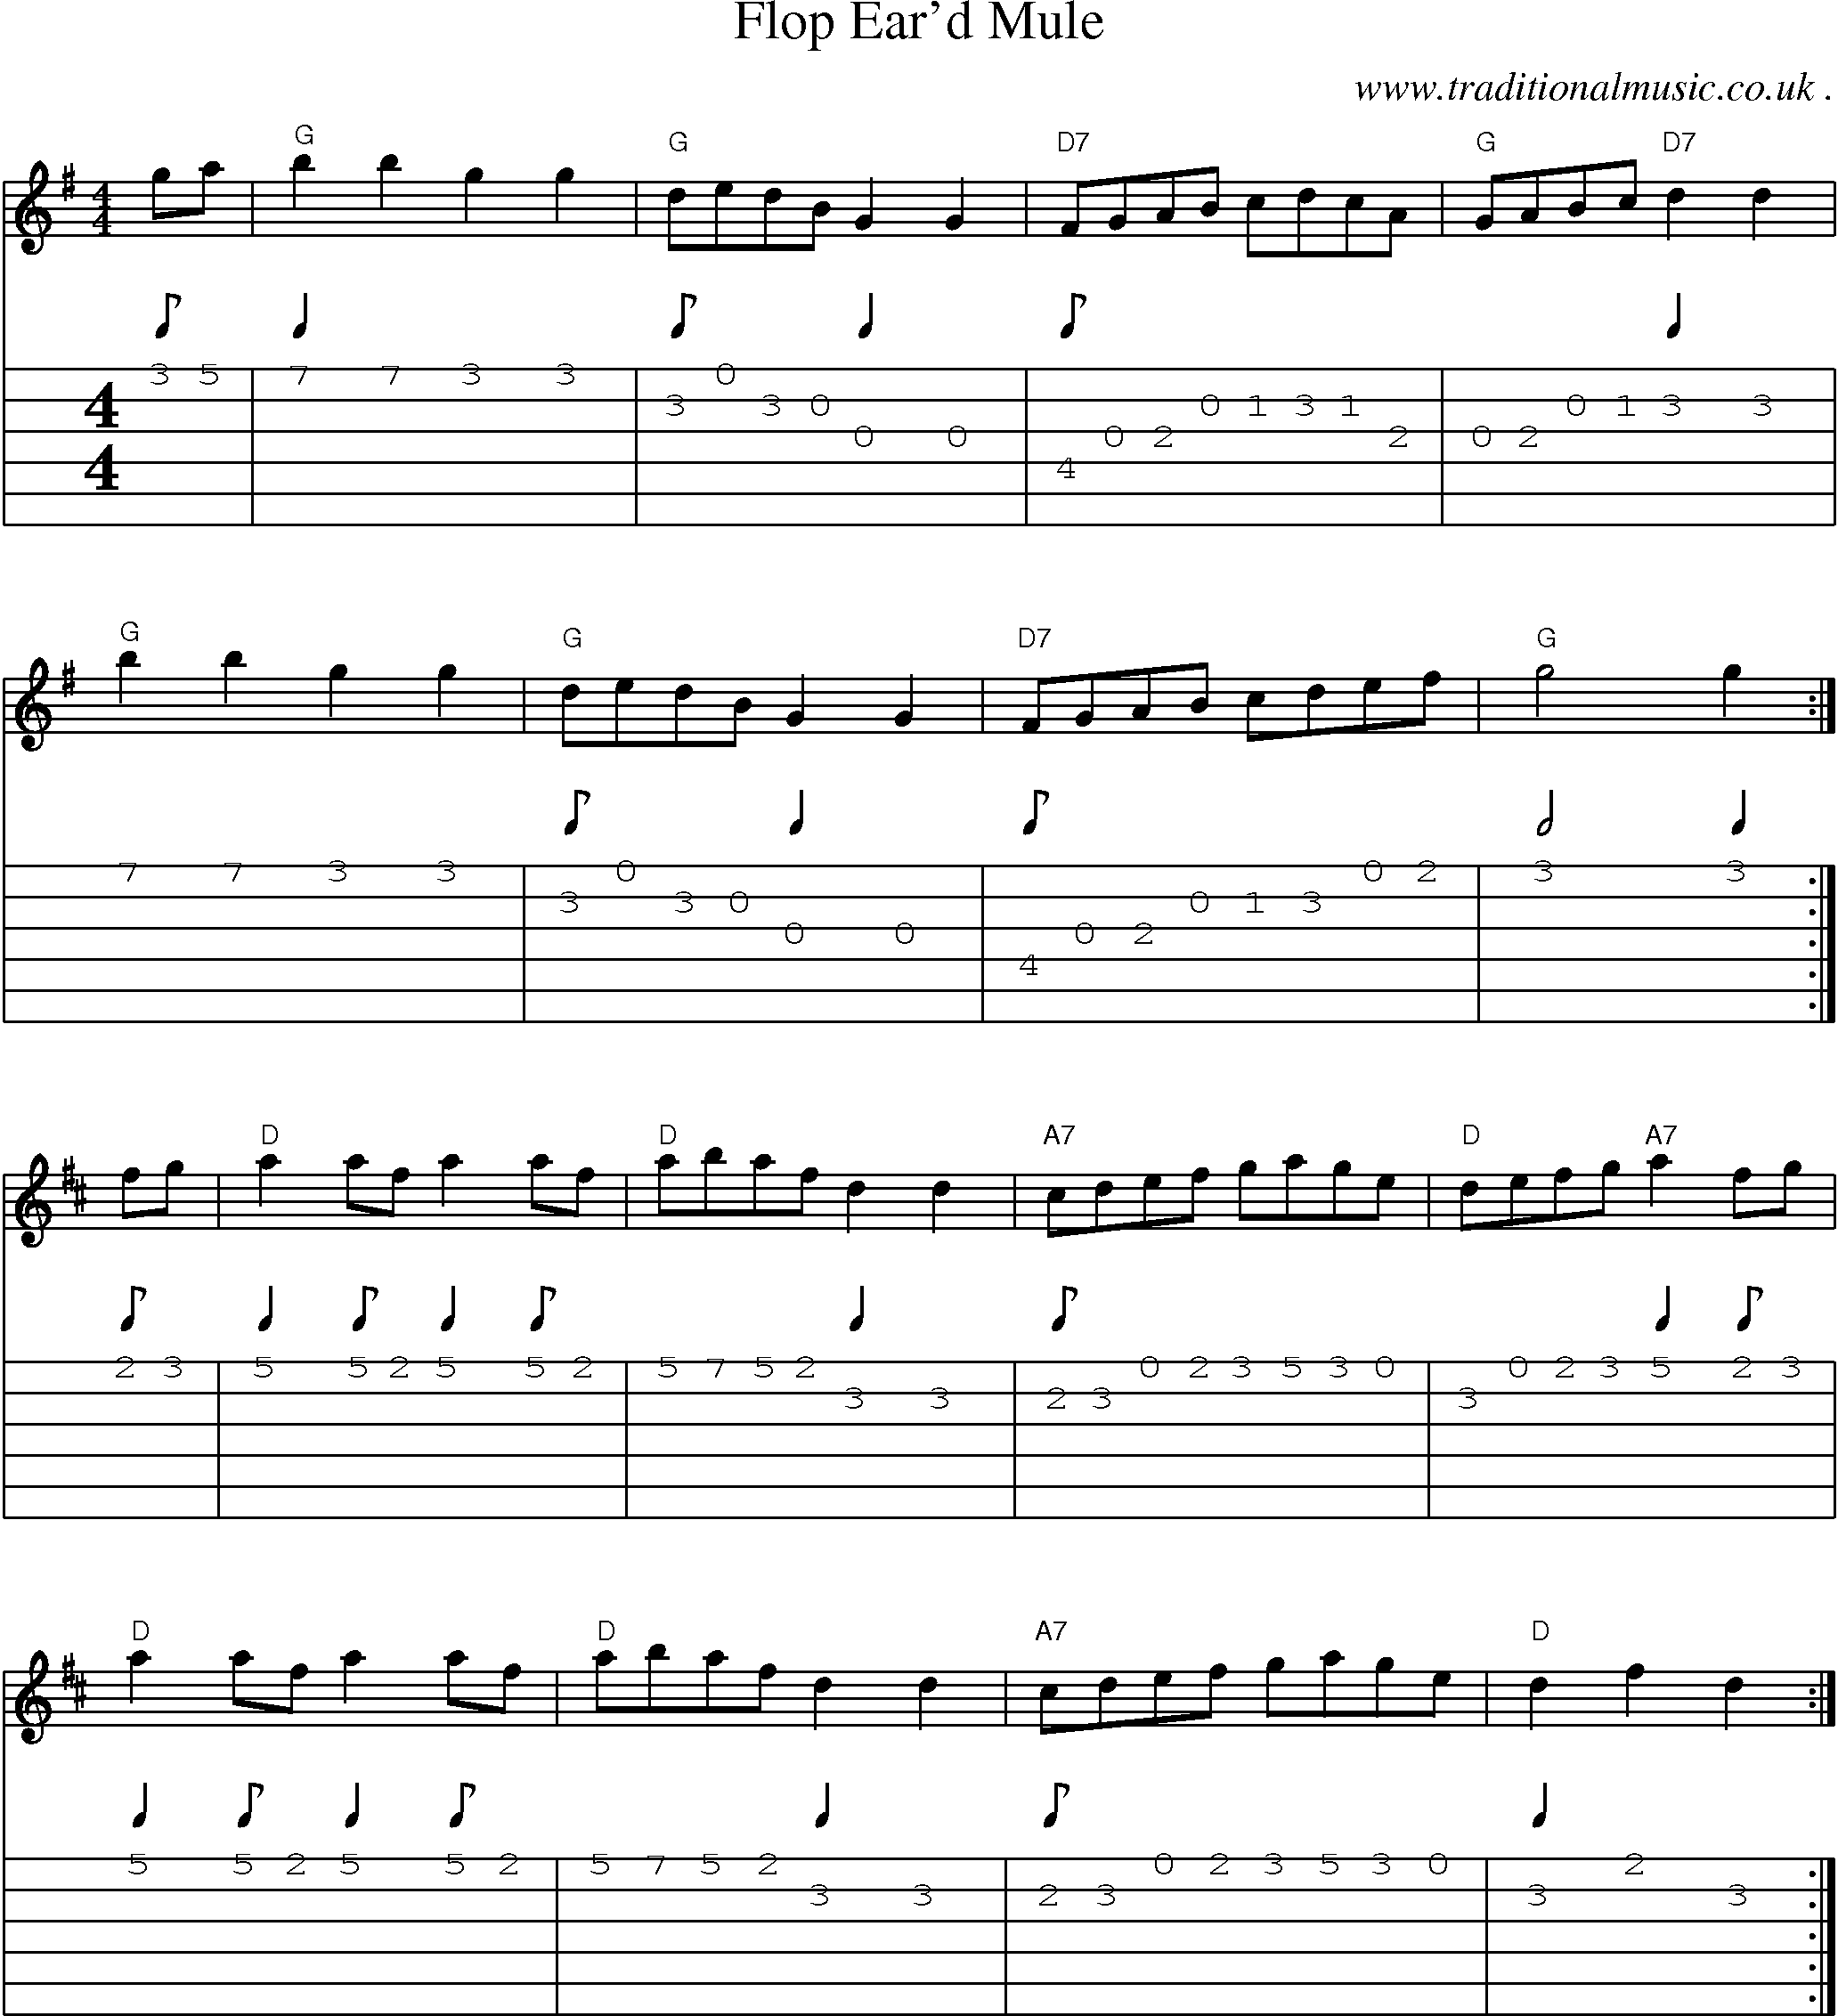 Music Score and Guitar Tabs for Flop Eard Mule